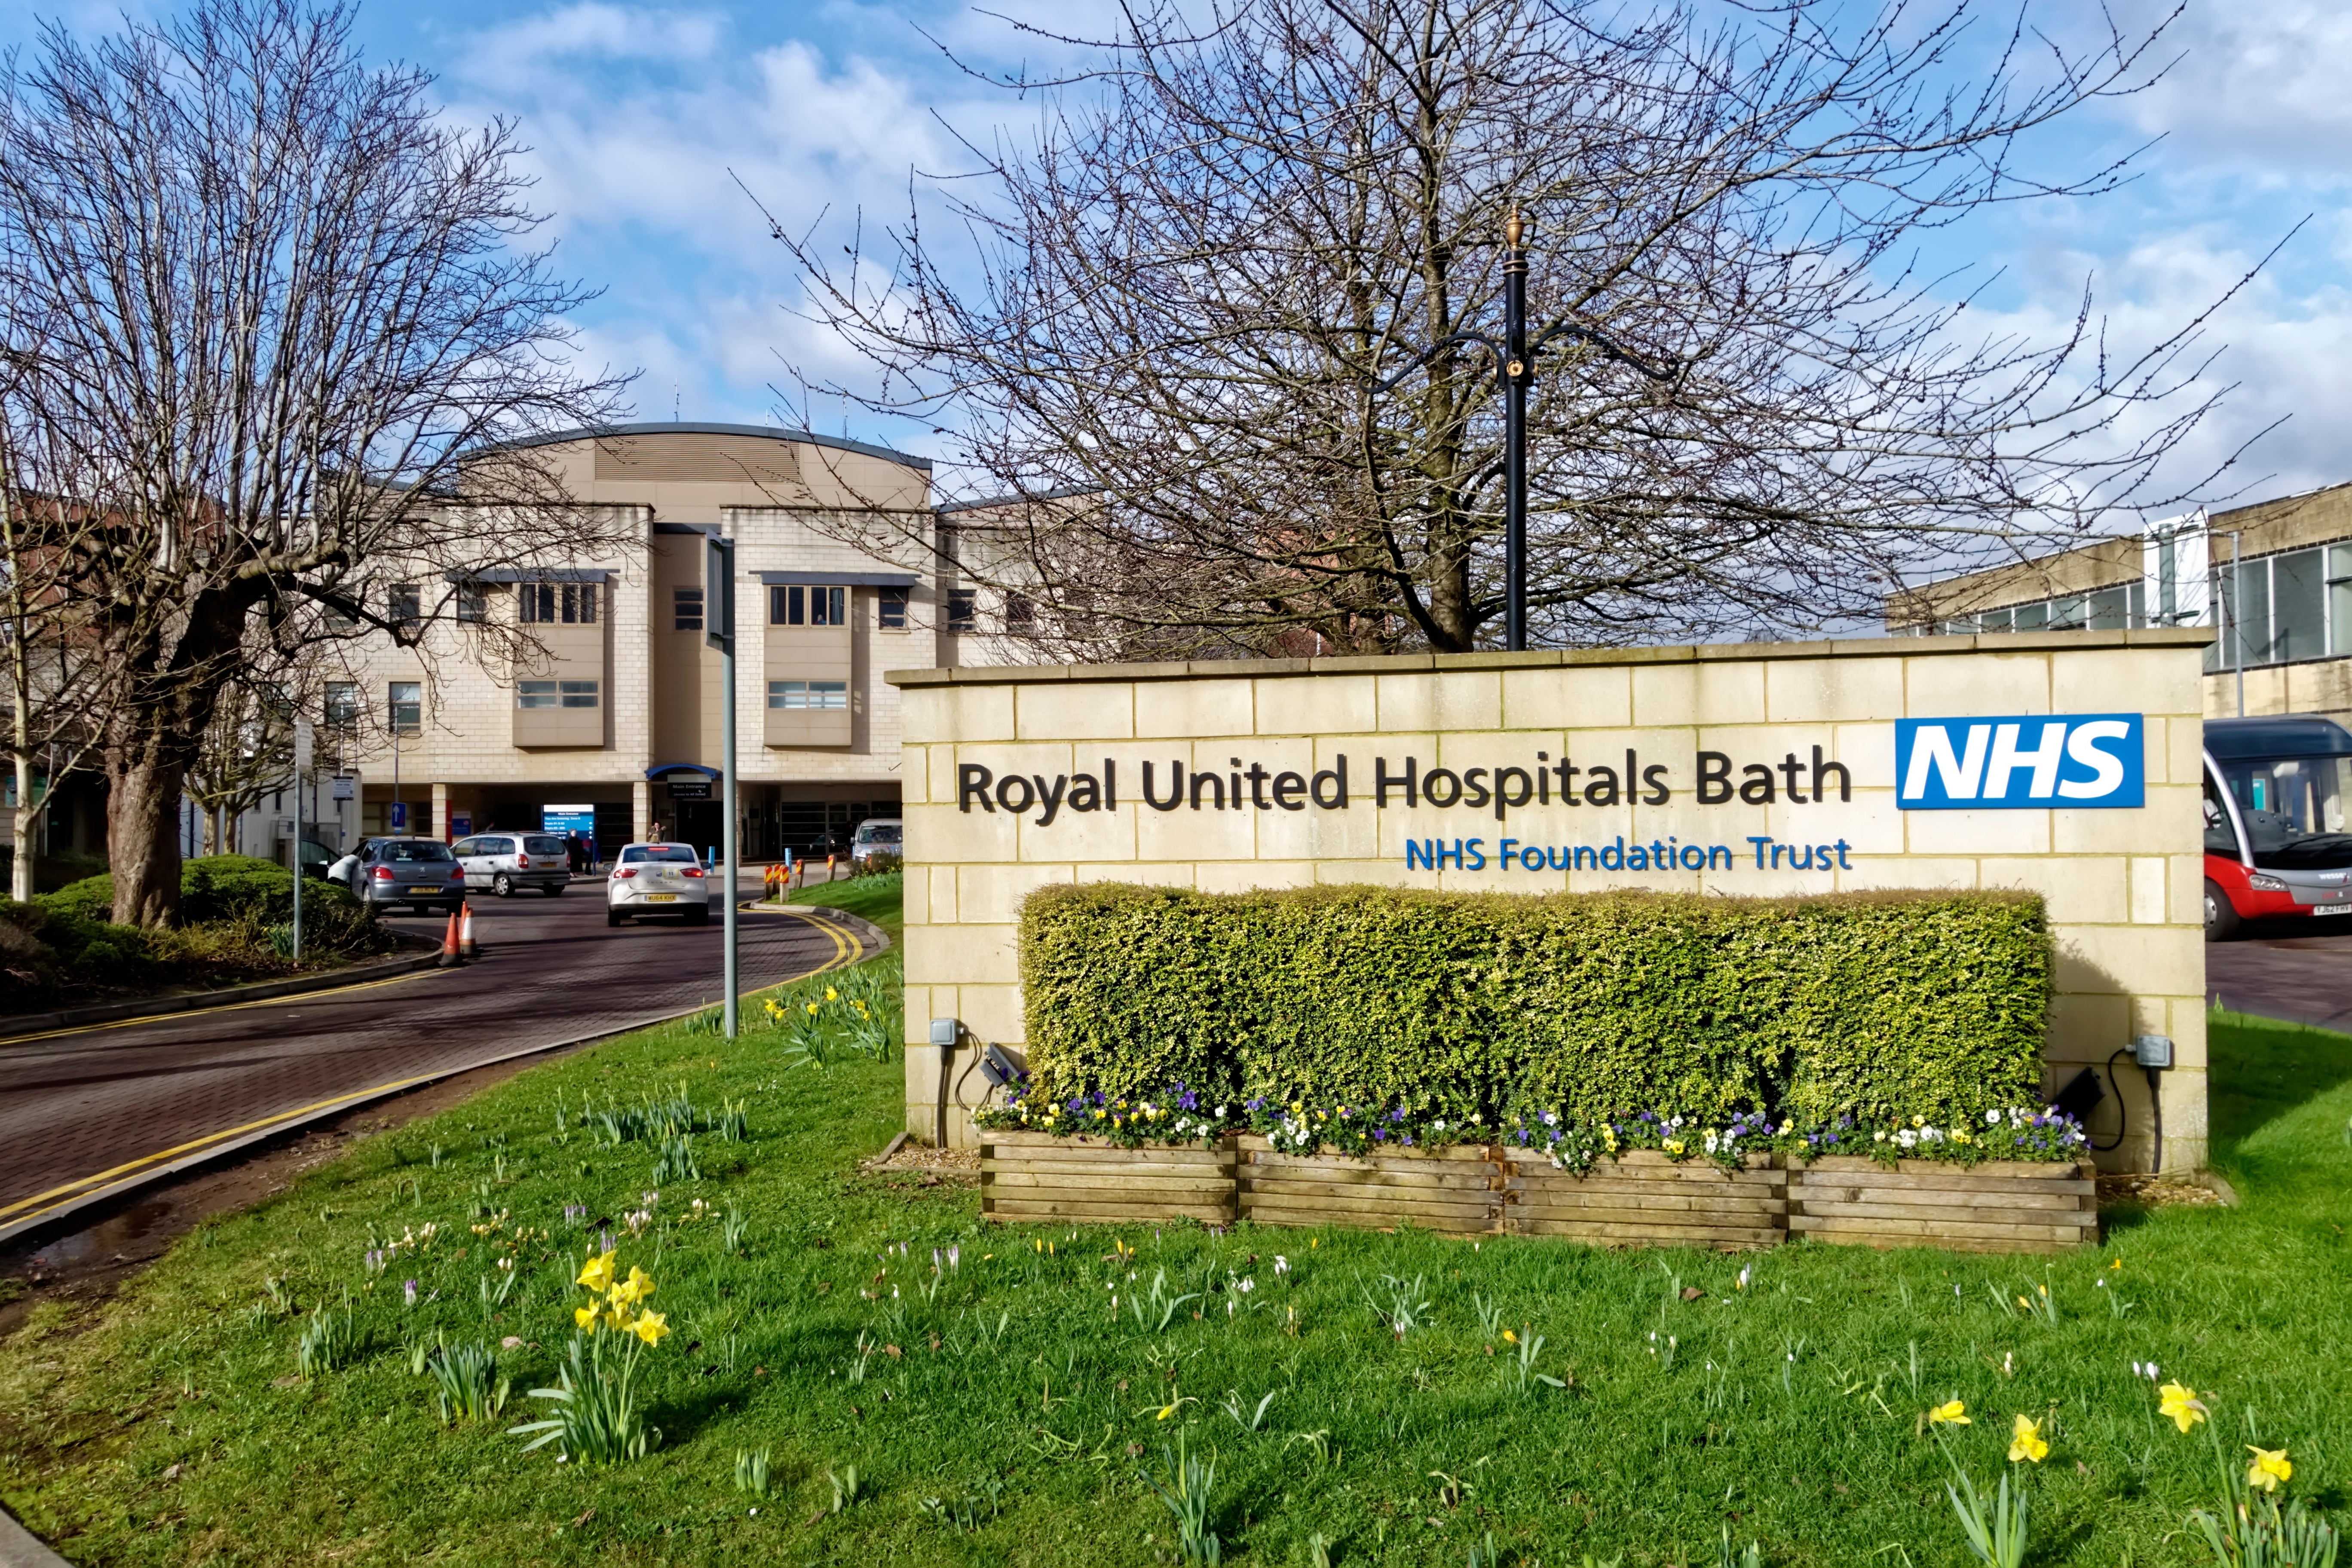 The Royal United Hospital in Bath was put on lockdown on Friday morning